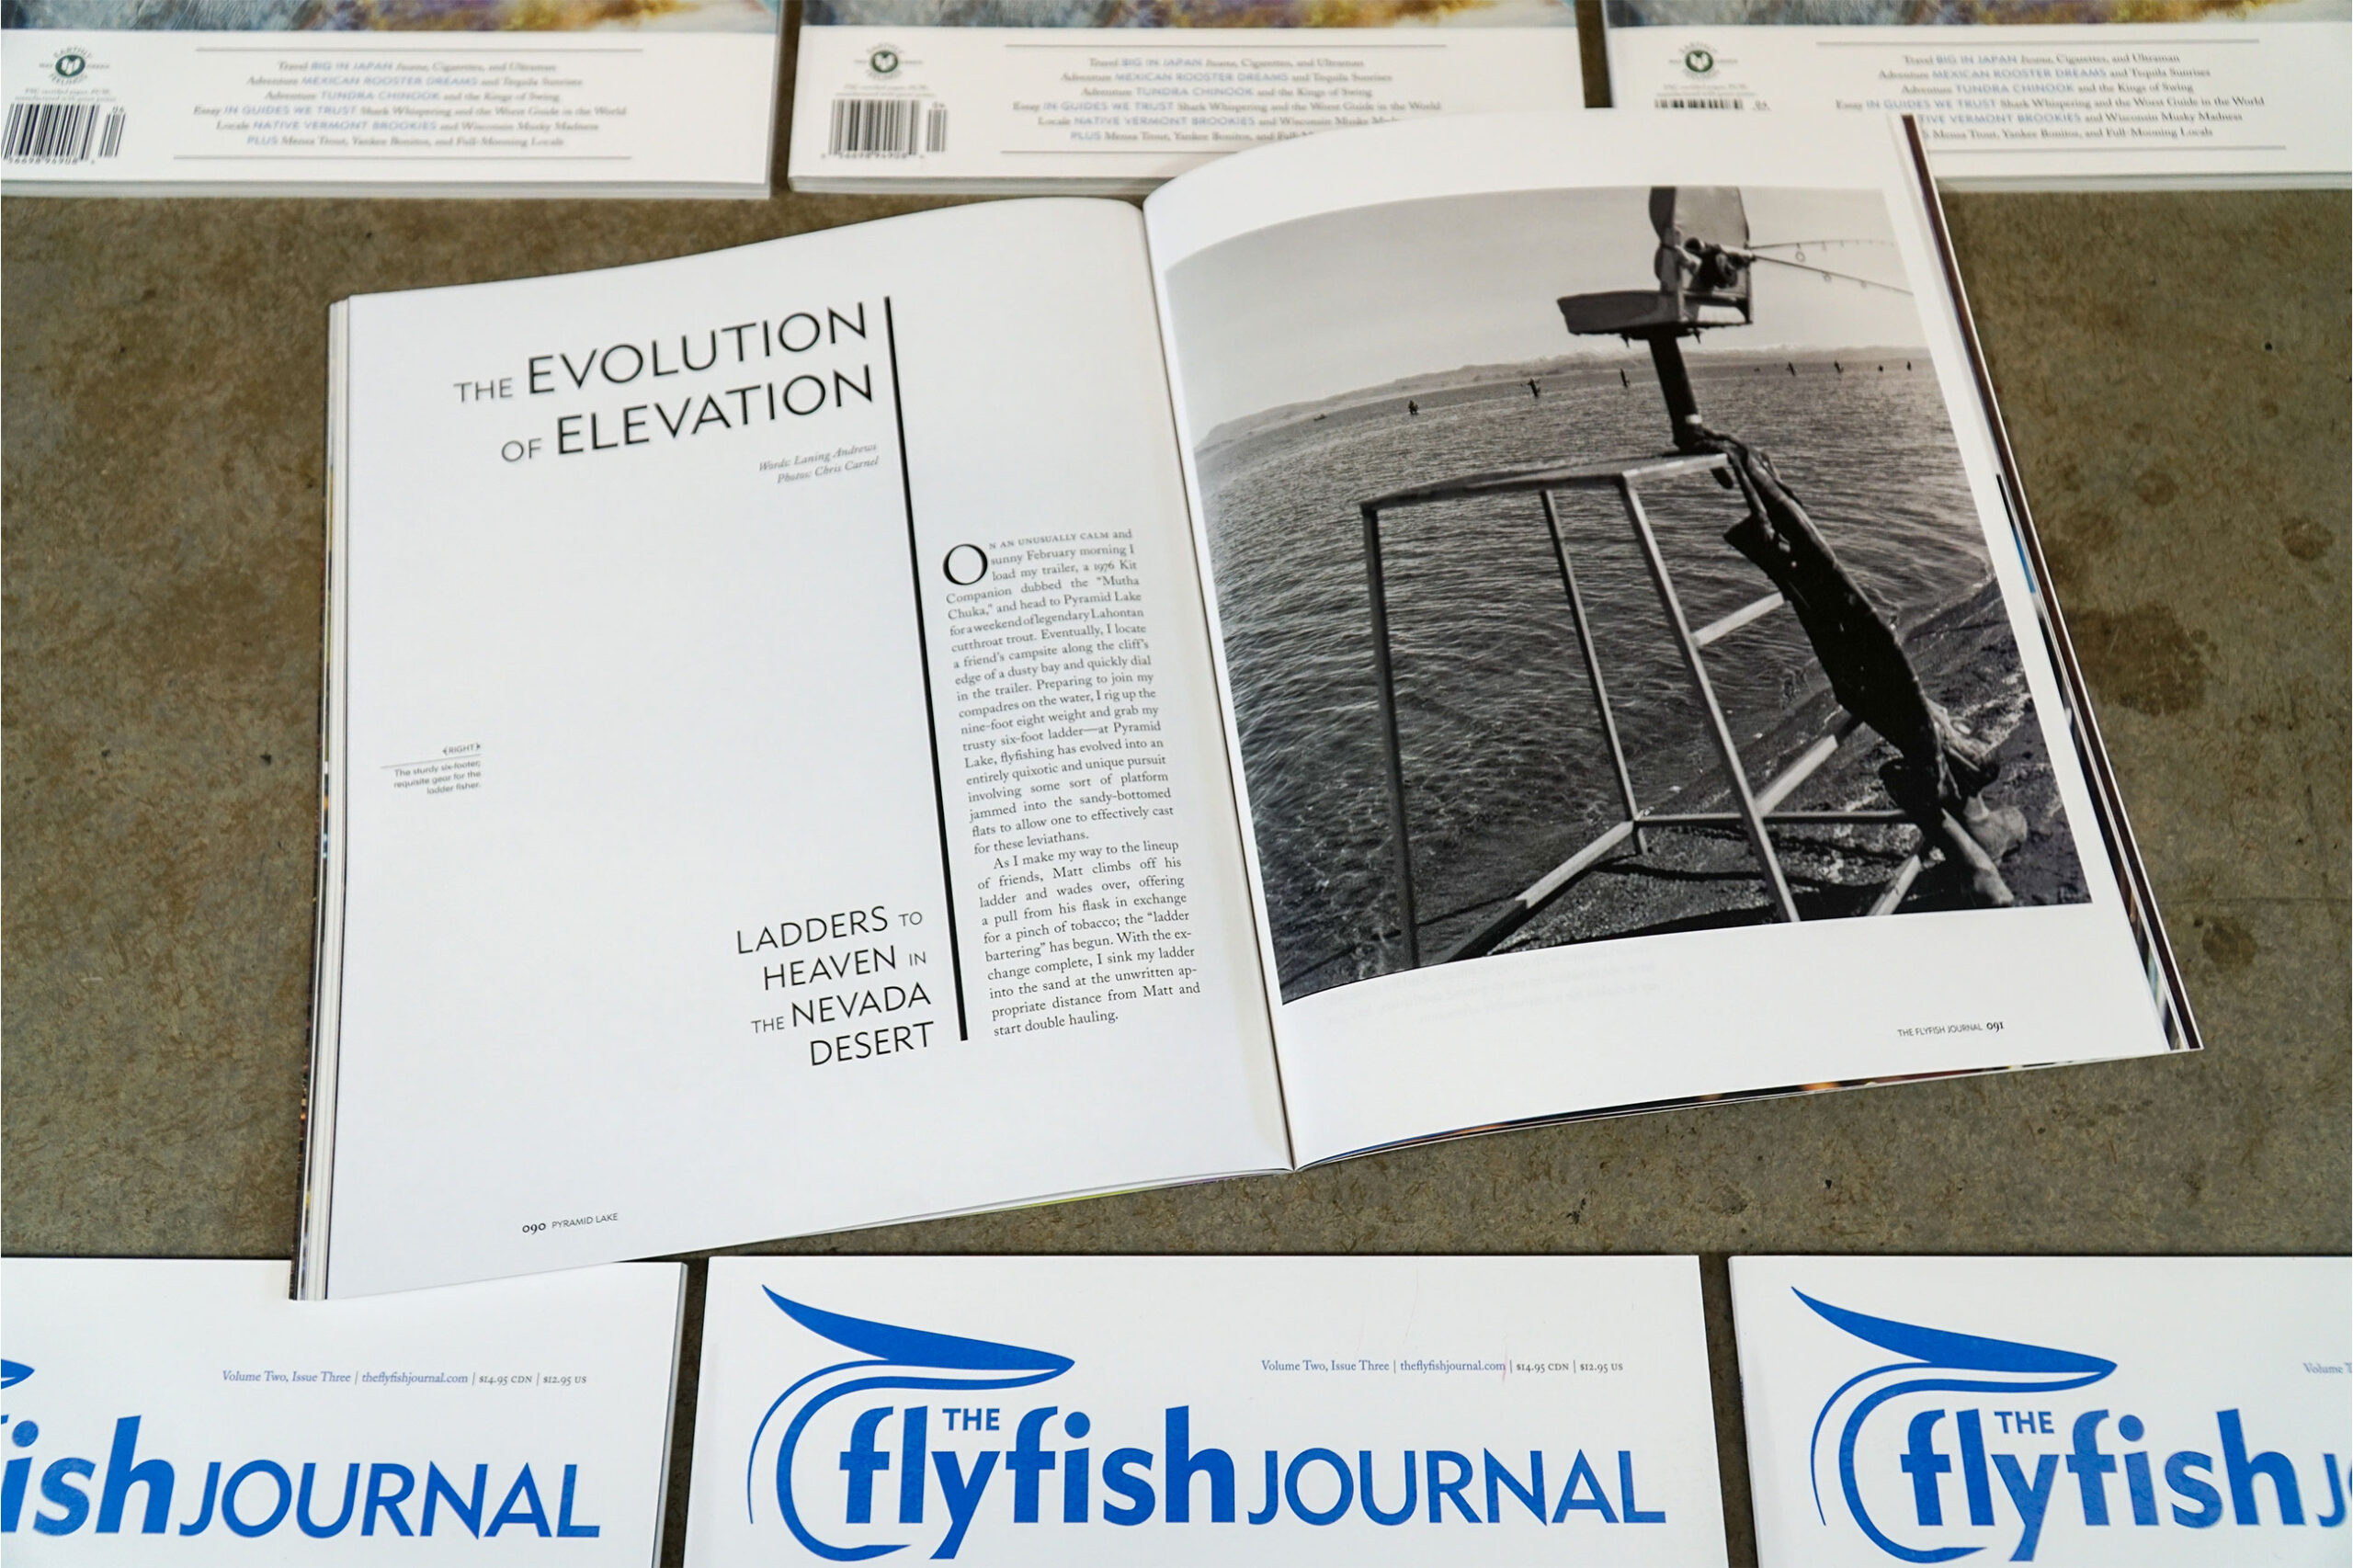 The Flyfish Journal Volume 2 Issue 3 Feature The Evolution of Elevation